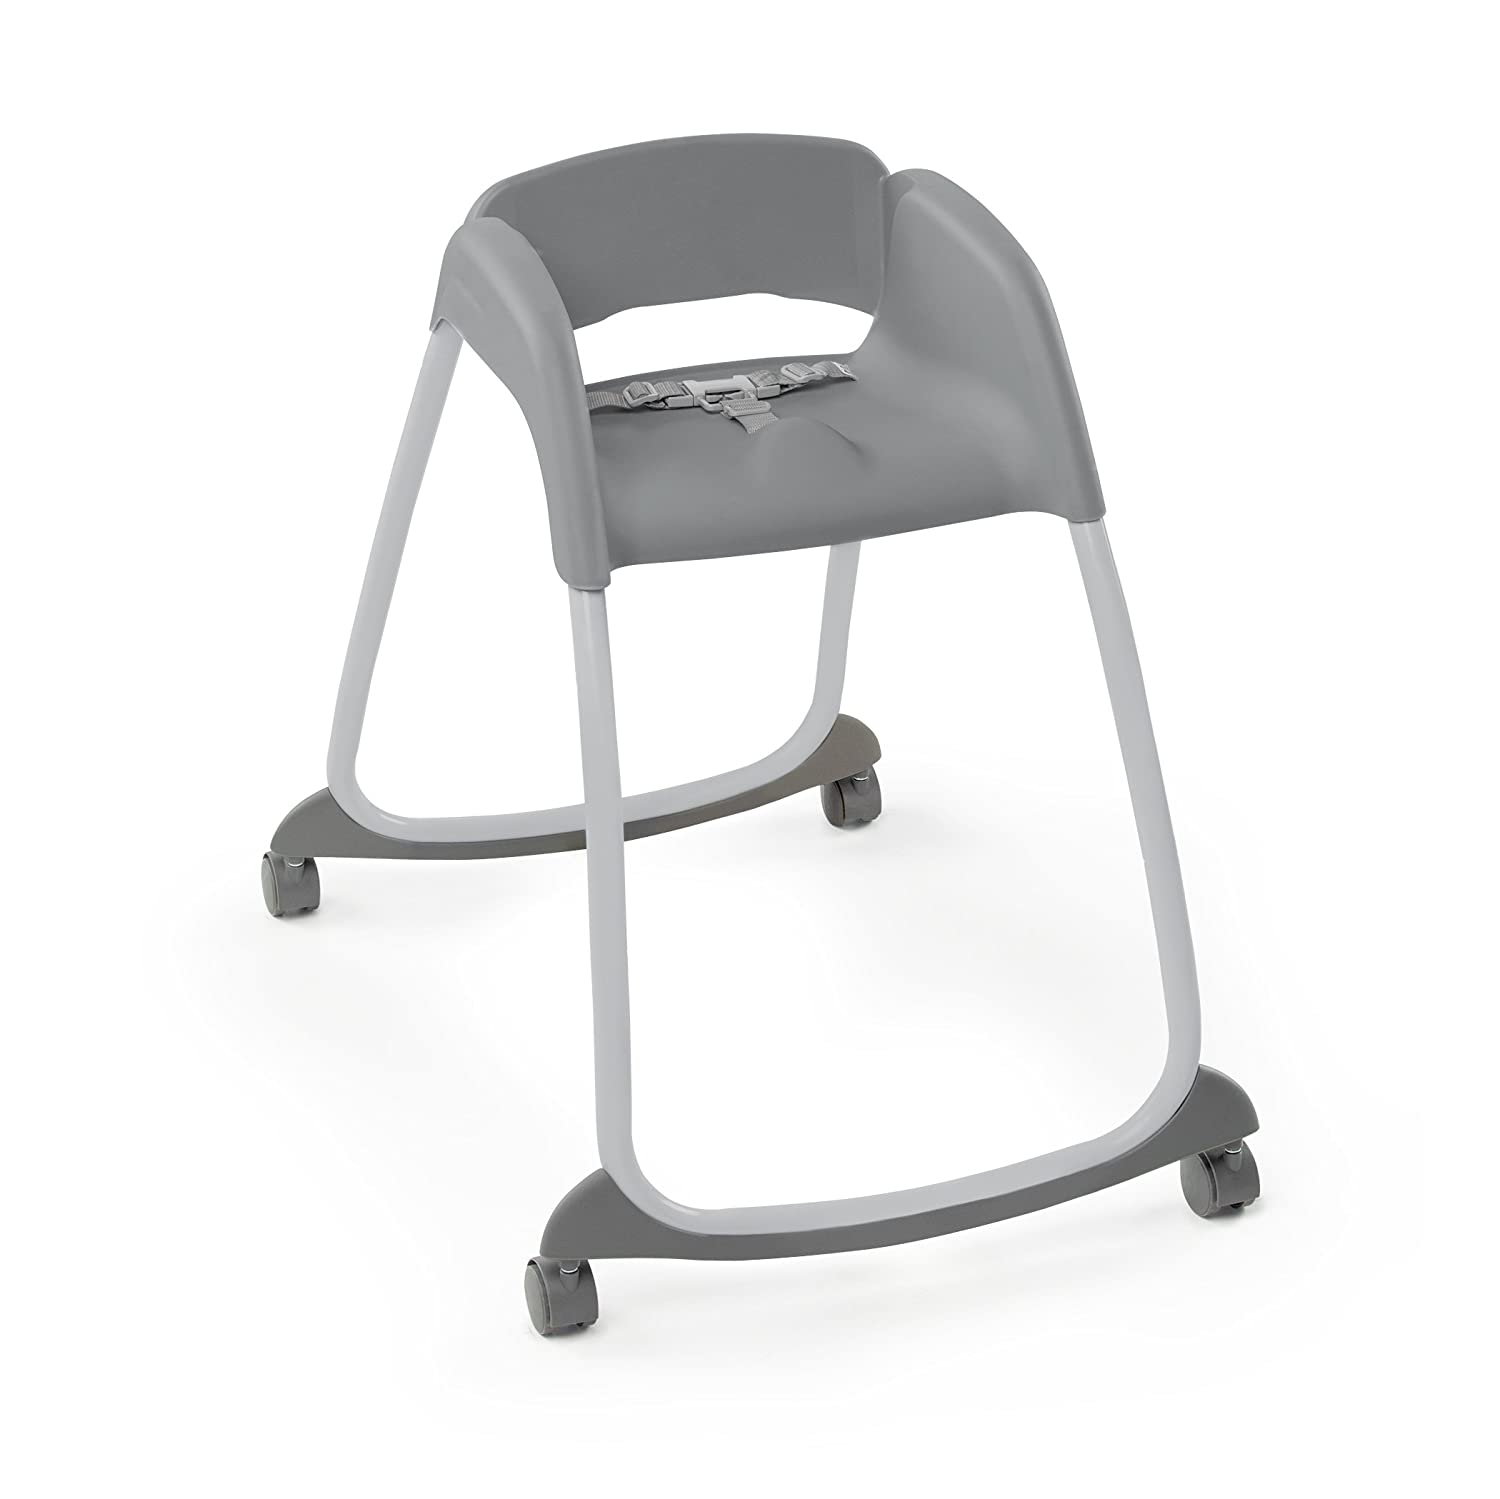 Ingenuity Trio 3-in-1 High Chair – Ridgedale - High Chair, Toddler Chair, and Booster